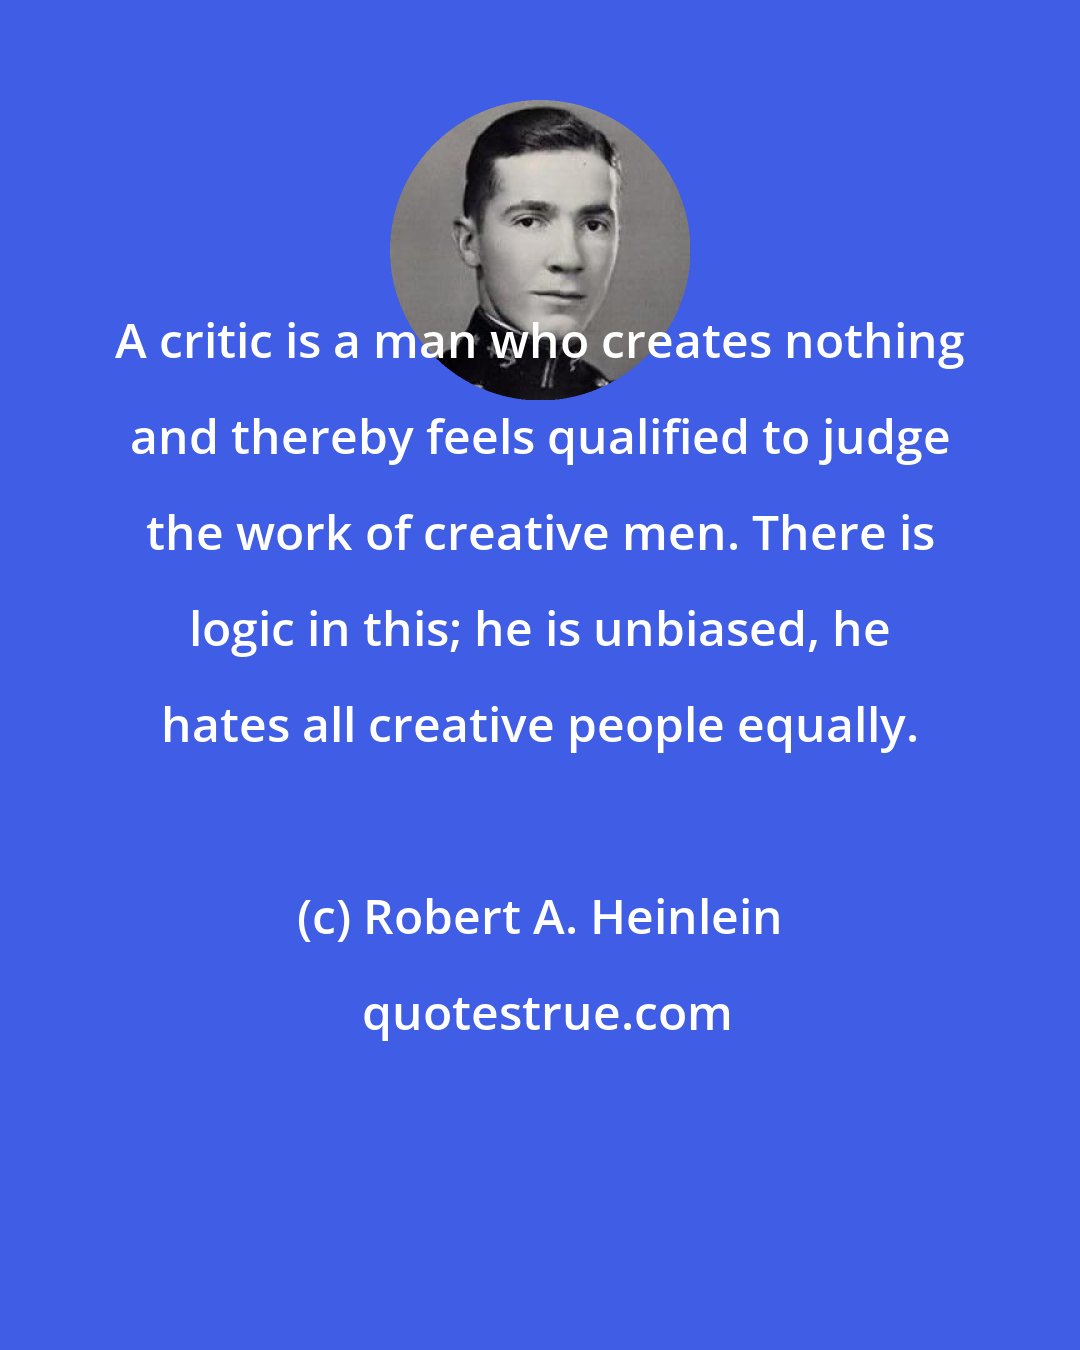 Robert A. Heinlein: A critic is a man who creates nothing and thereby feels qualified to judge the work of creative men. There is logic in this; he is unbiased, he hates all creative people equally.